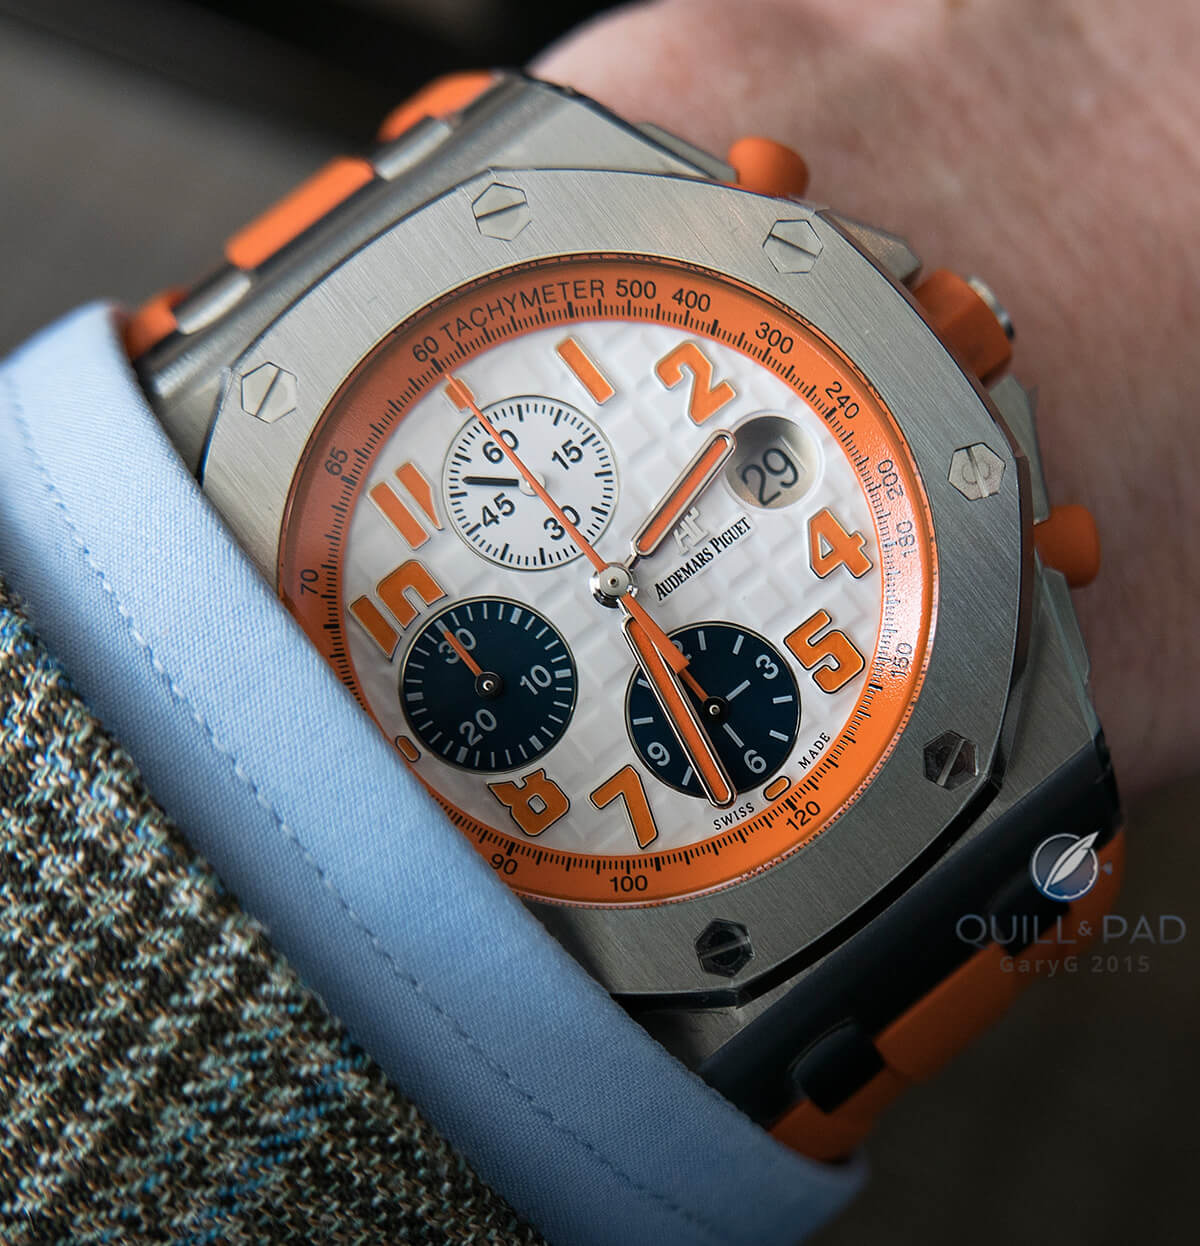 Audemars Piguet Royal Oak Offshore in stainless steel, a limited edition of 48 pieces